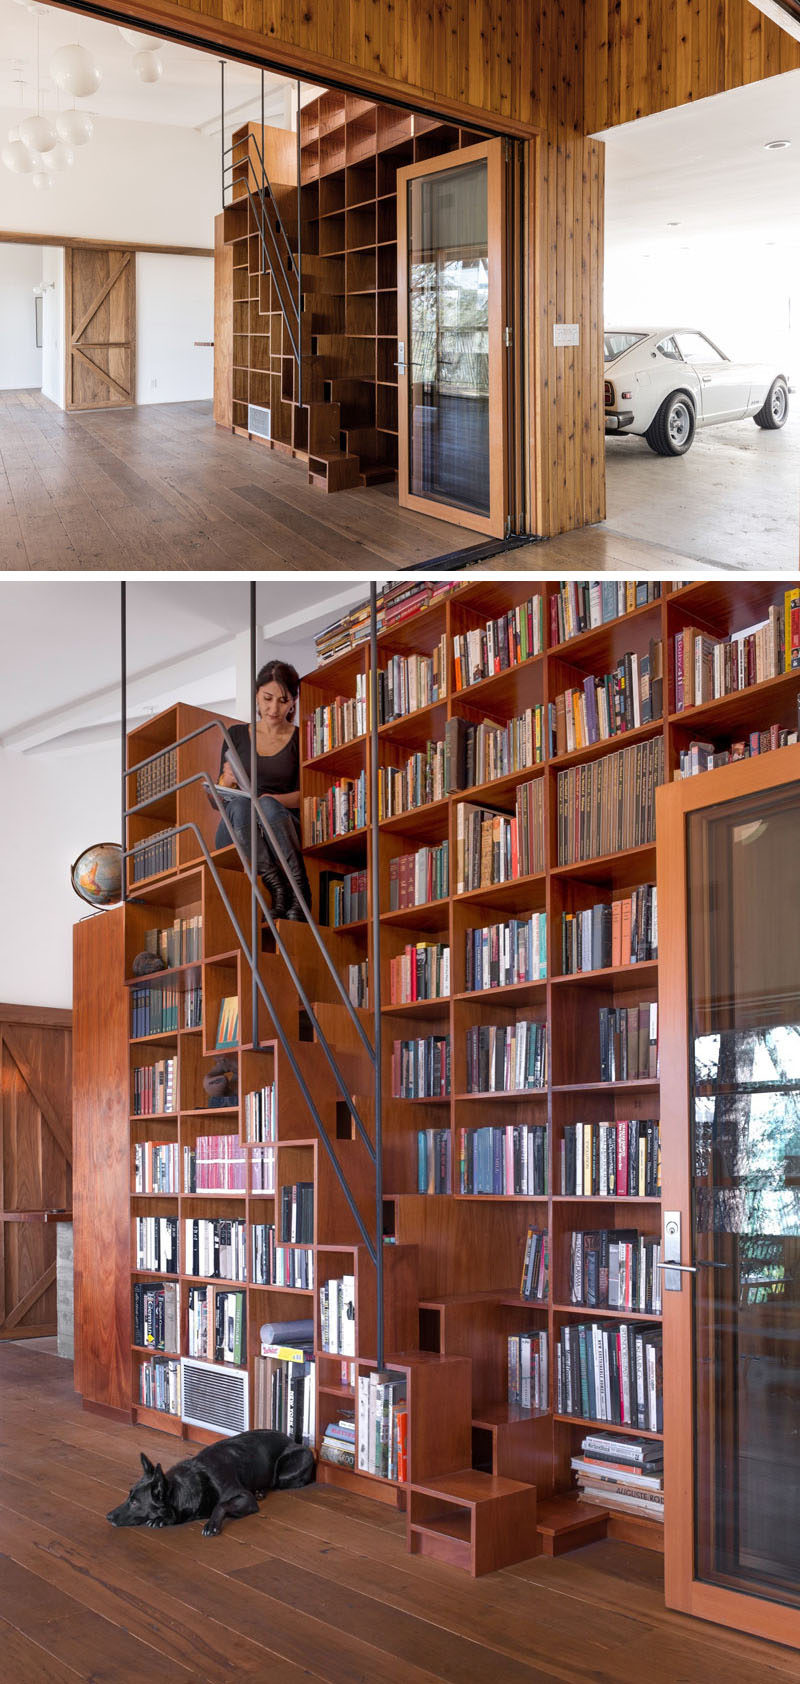 This contemporary home has a custom floor-to-ceiling bookshelf that has built-in stairs and a space to sit at the top.